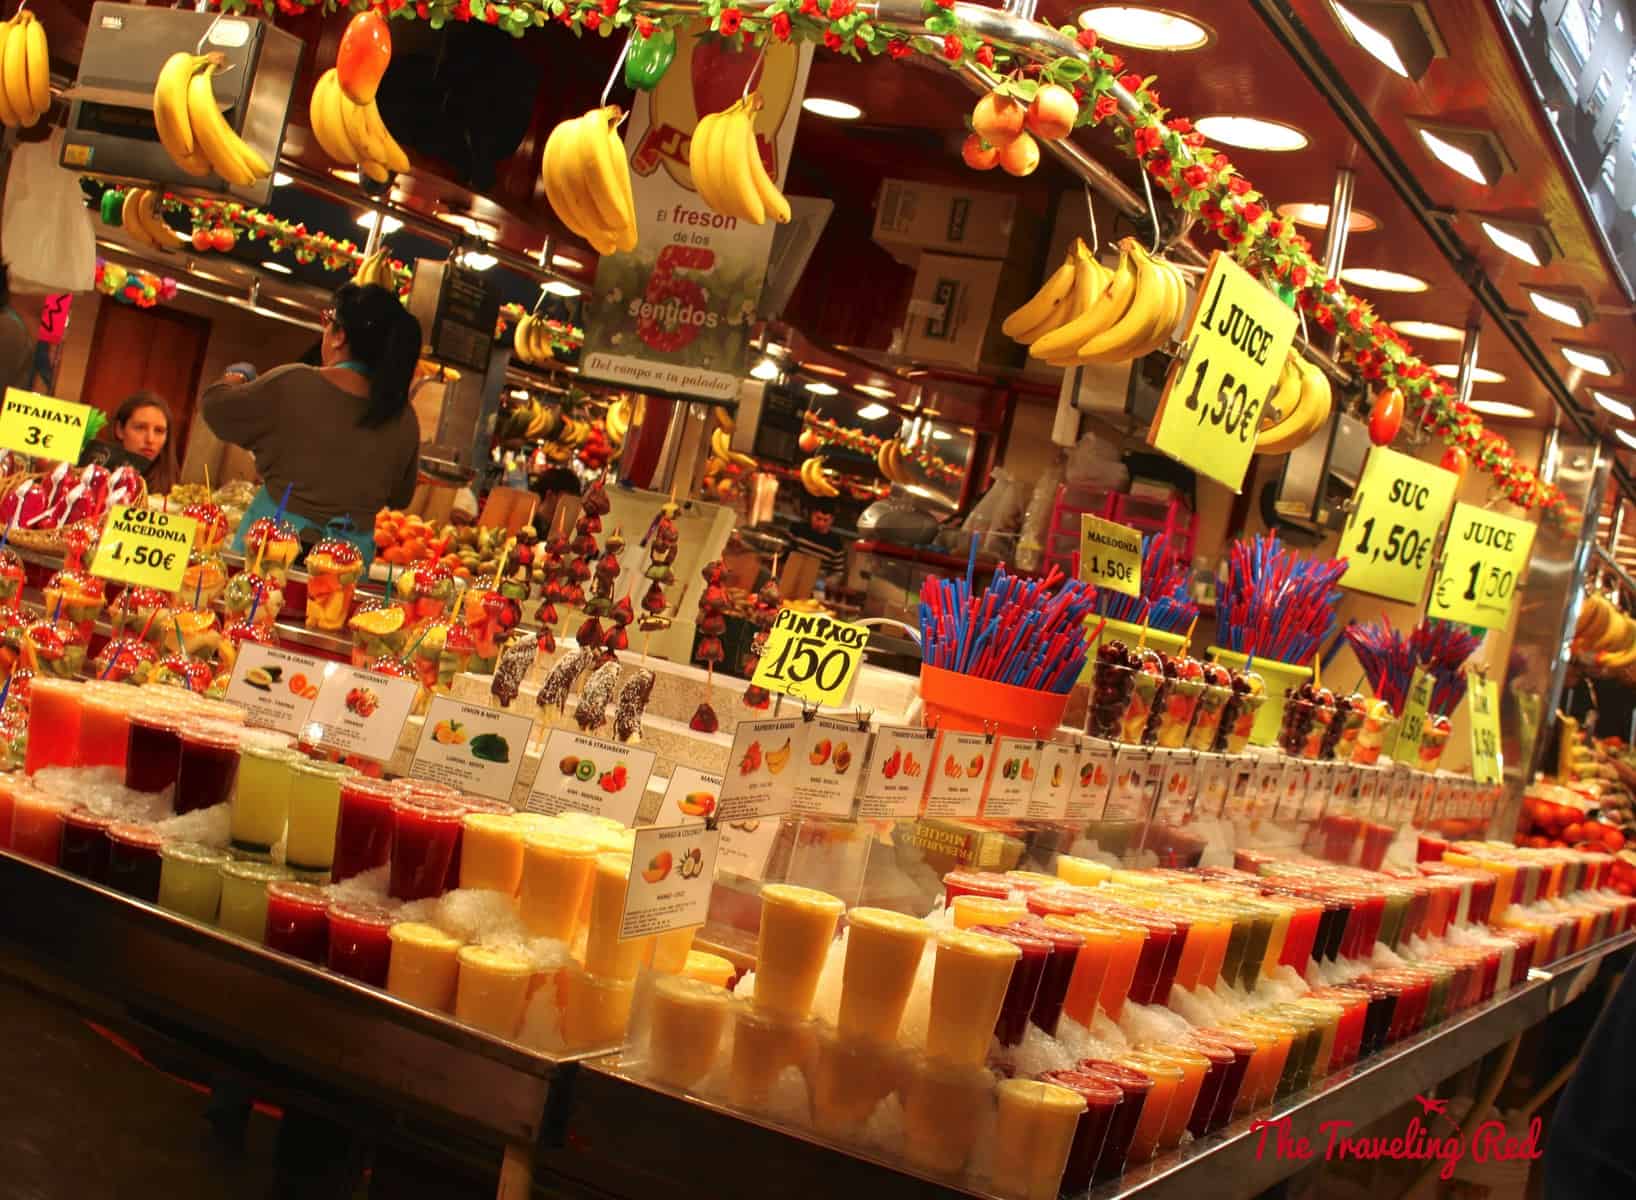 You can't miss the famous La Boqueria, a vibrant fresh market on Las Ramblas in Barcelona, Spain. They sell everything.... fresh fruit, seafood, smoothies, candy, chocolates, etc.